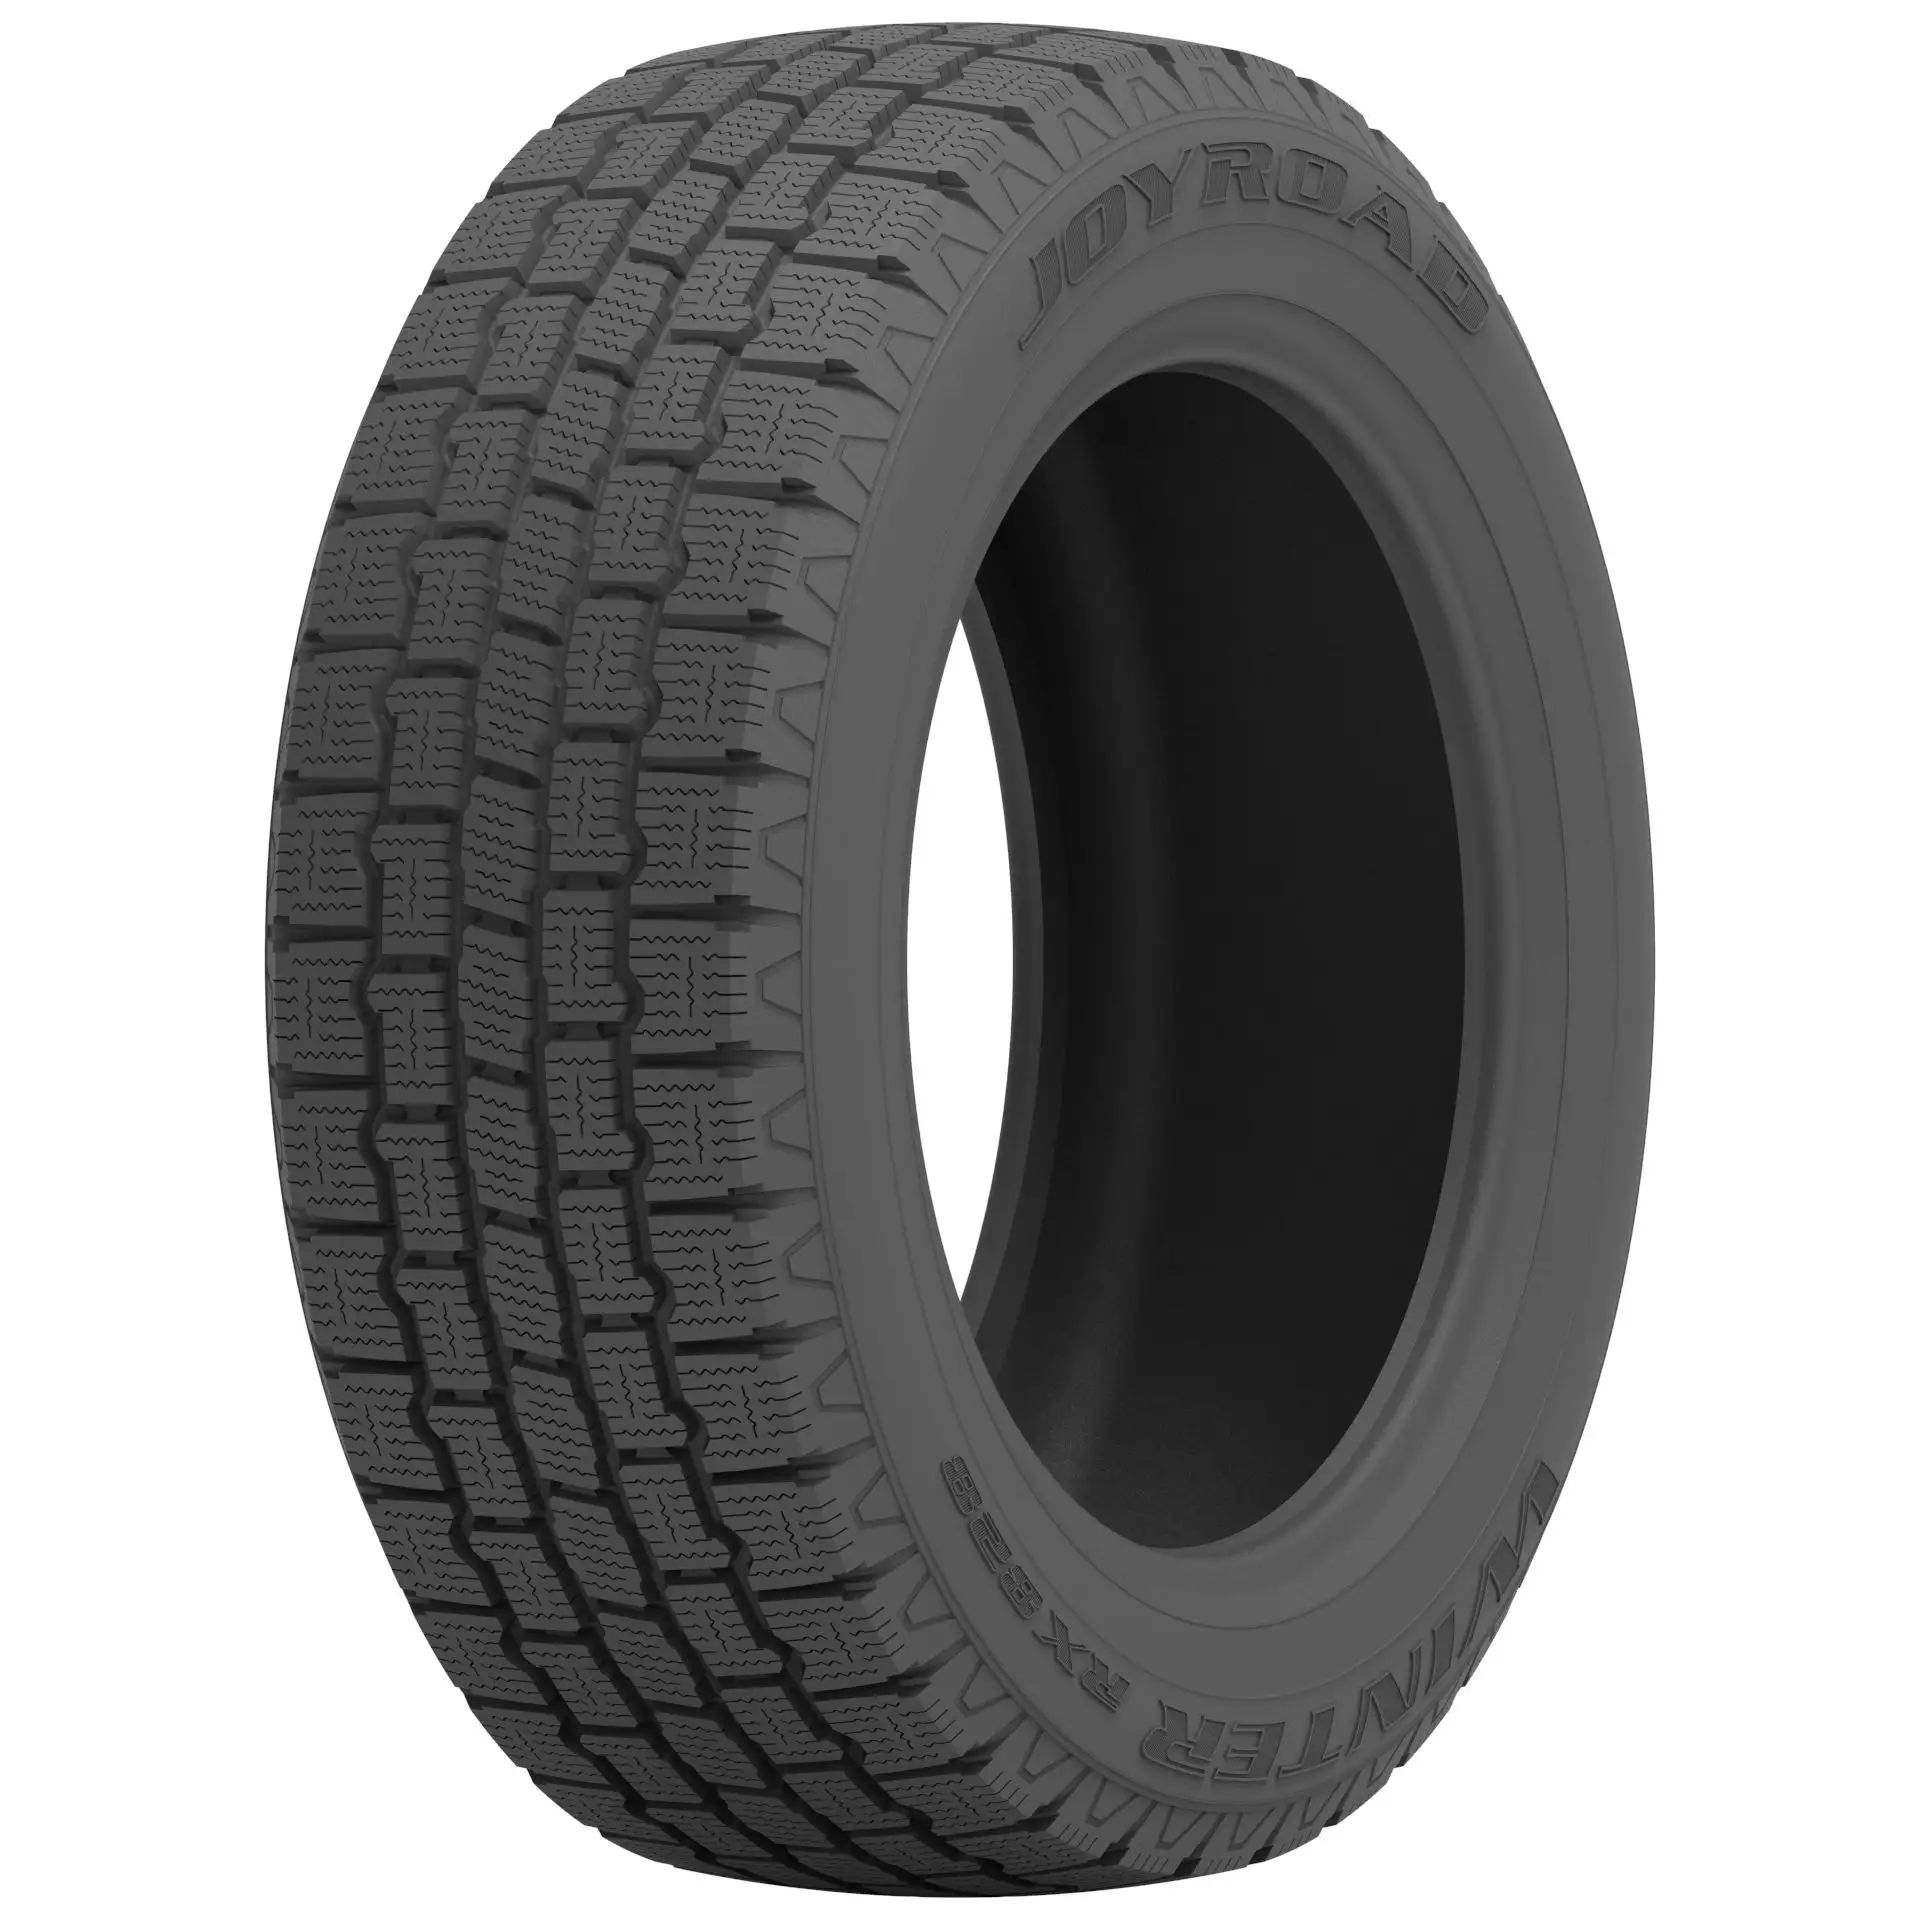 New tires for cars all sizes manufacturer r13 r14 r15 r16 r17 r18 r19 r20 r21 r22 r23 r24